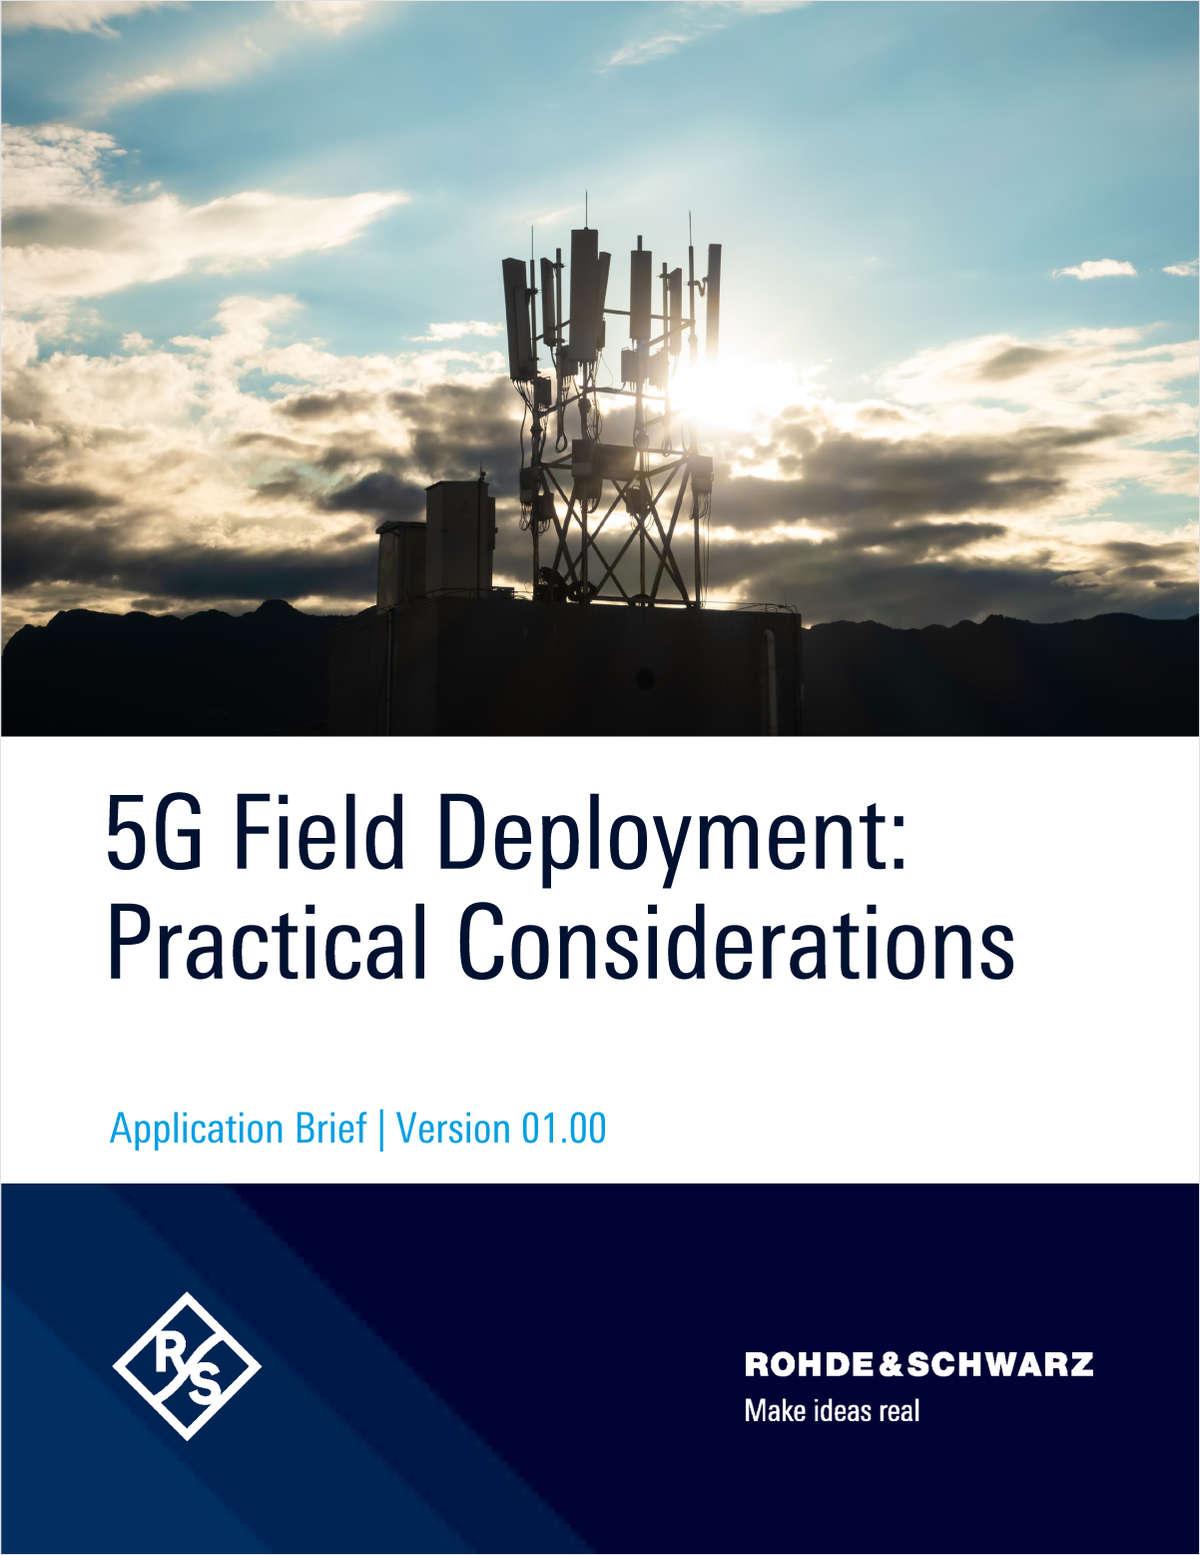 5G Field Deployment: Practical Considerations